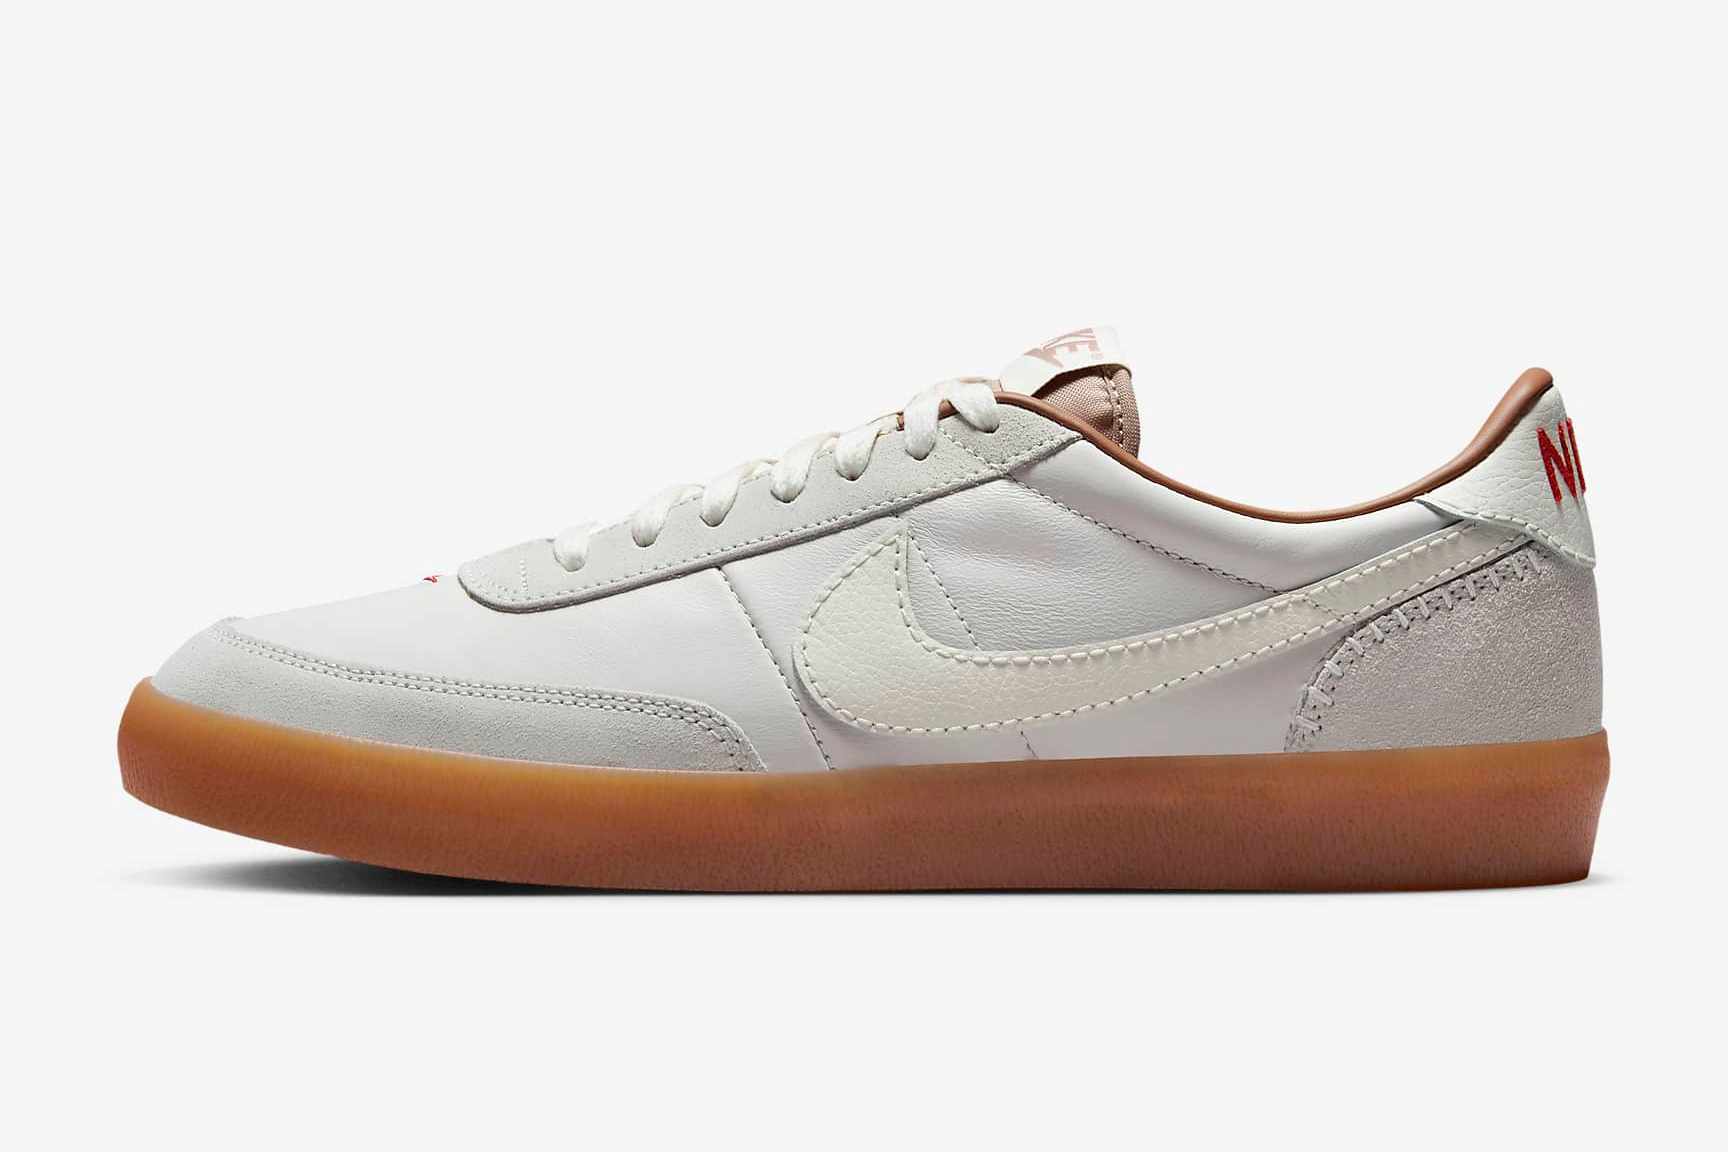 Nike's Killshot 2 sneaker in a grey colorway with stitching on the heel